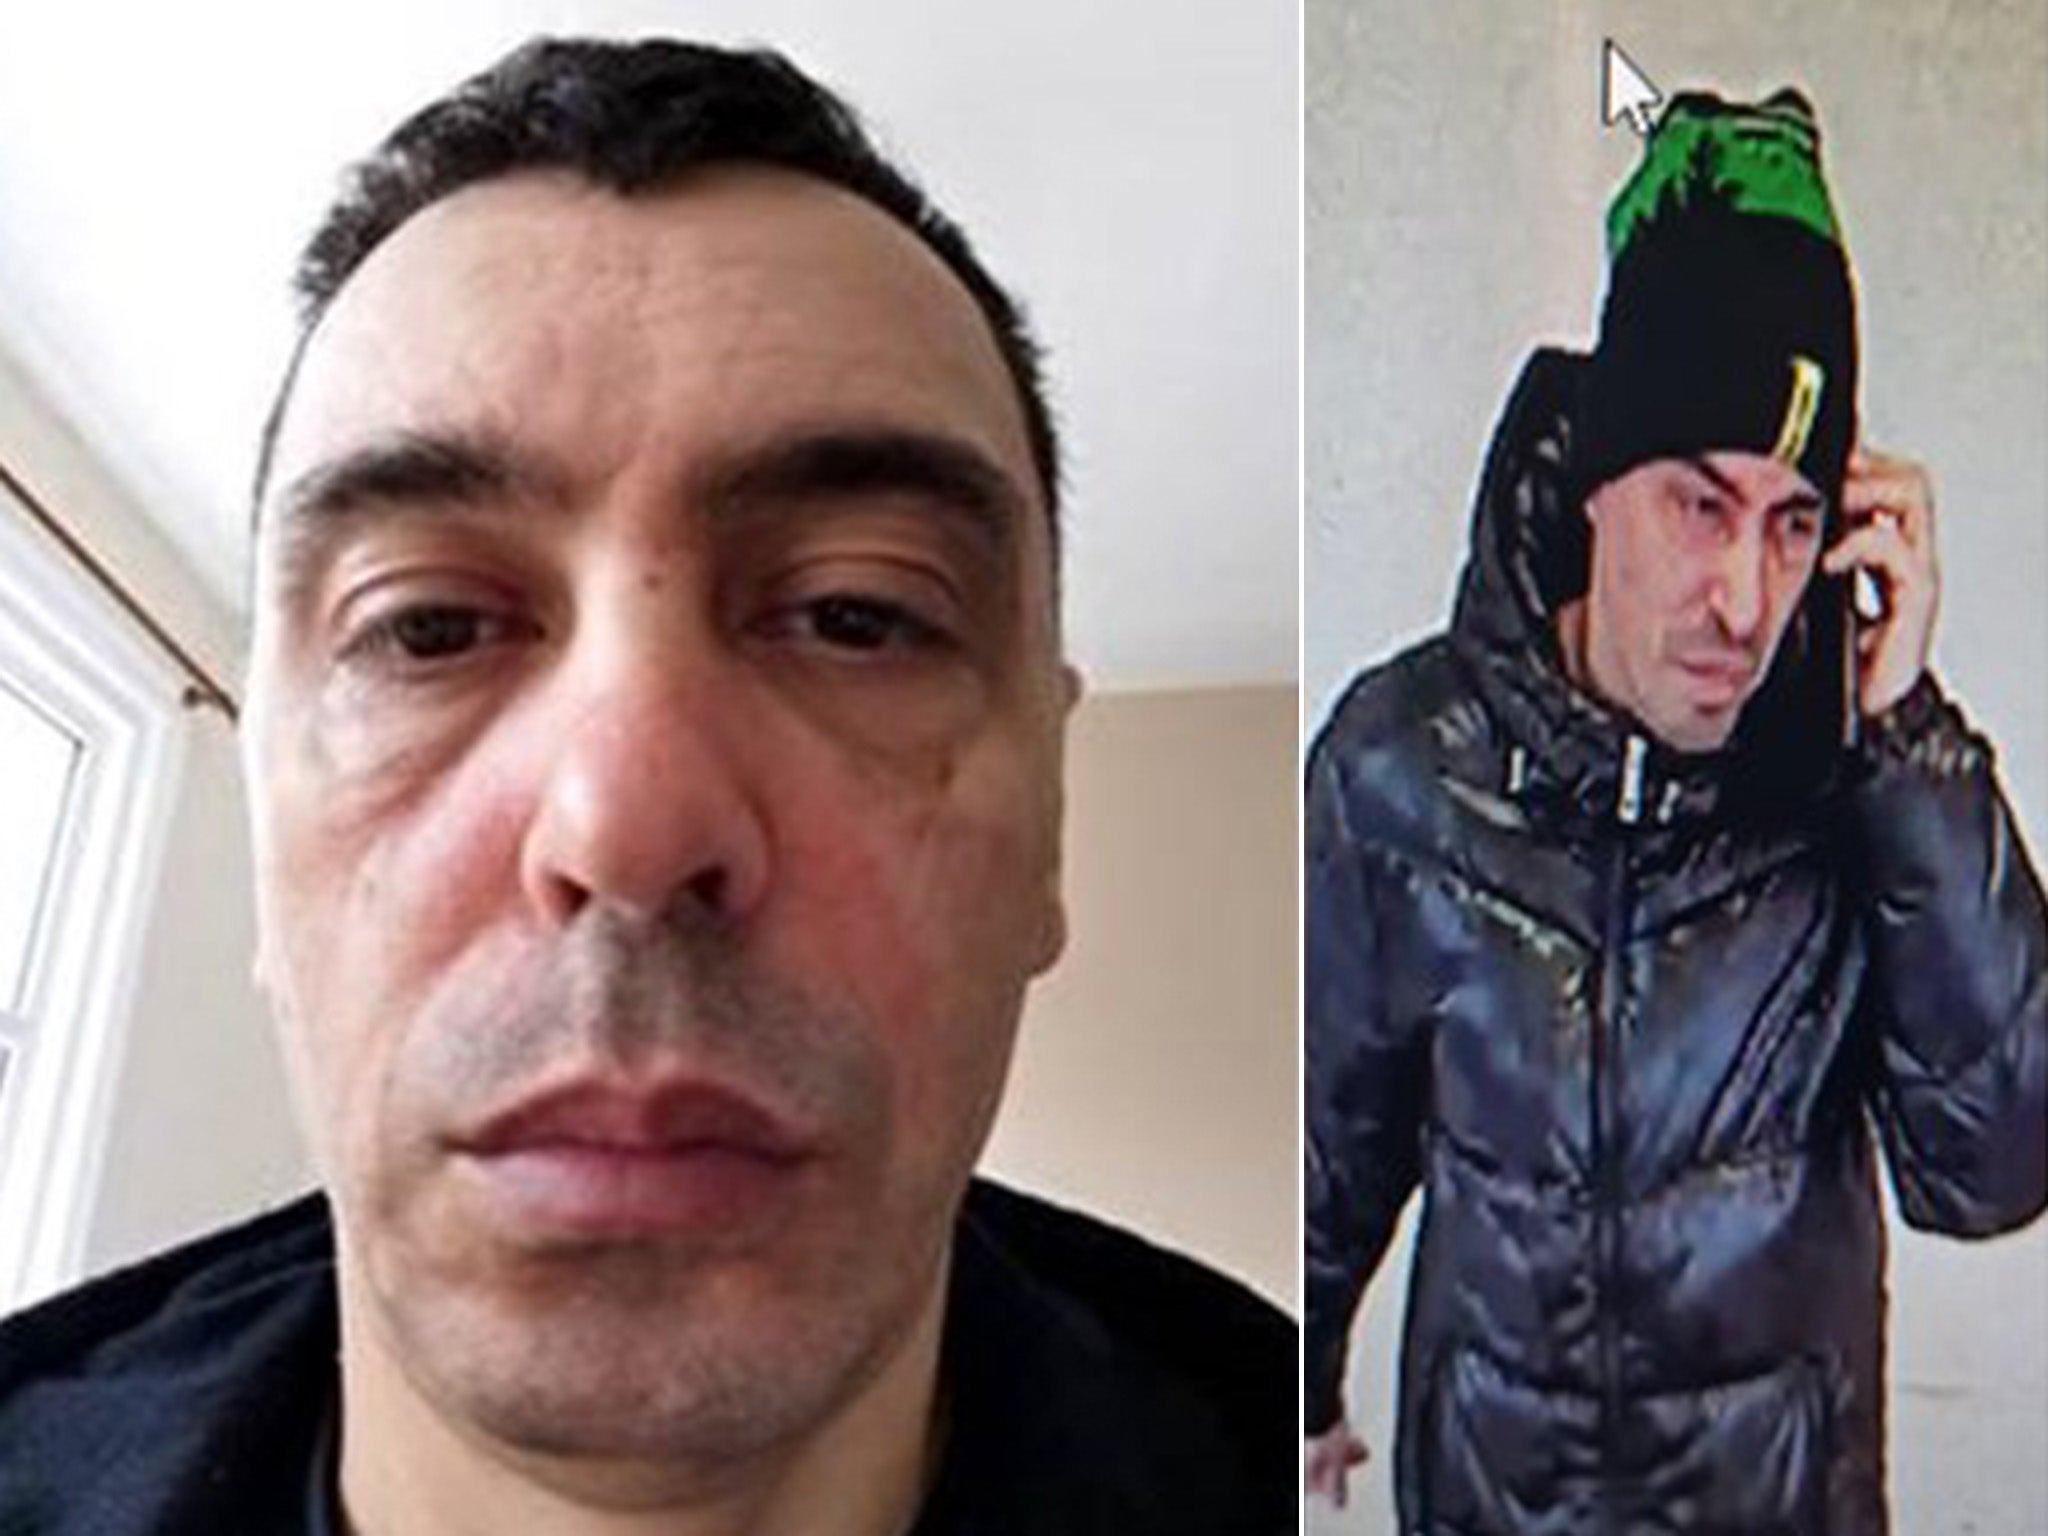 Georgian Constantin, who police are looking for in connection with the death of Valentina Cozma